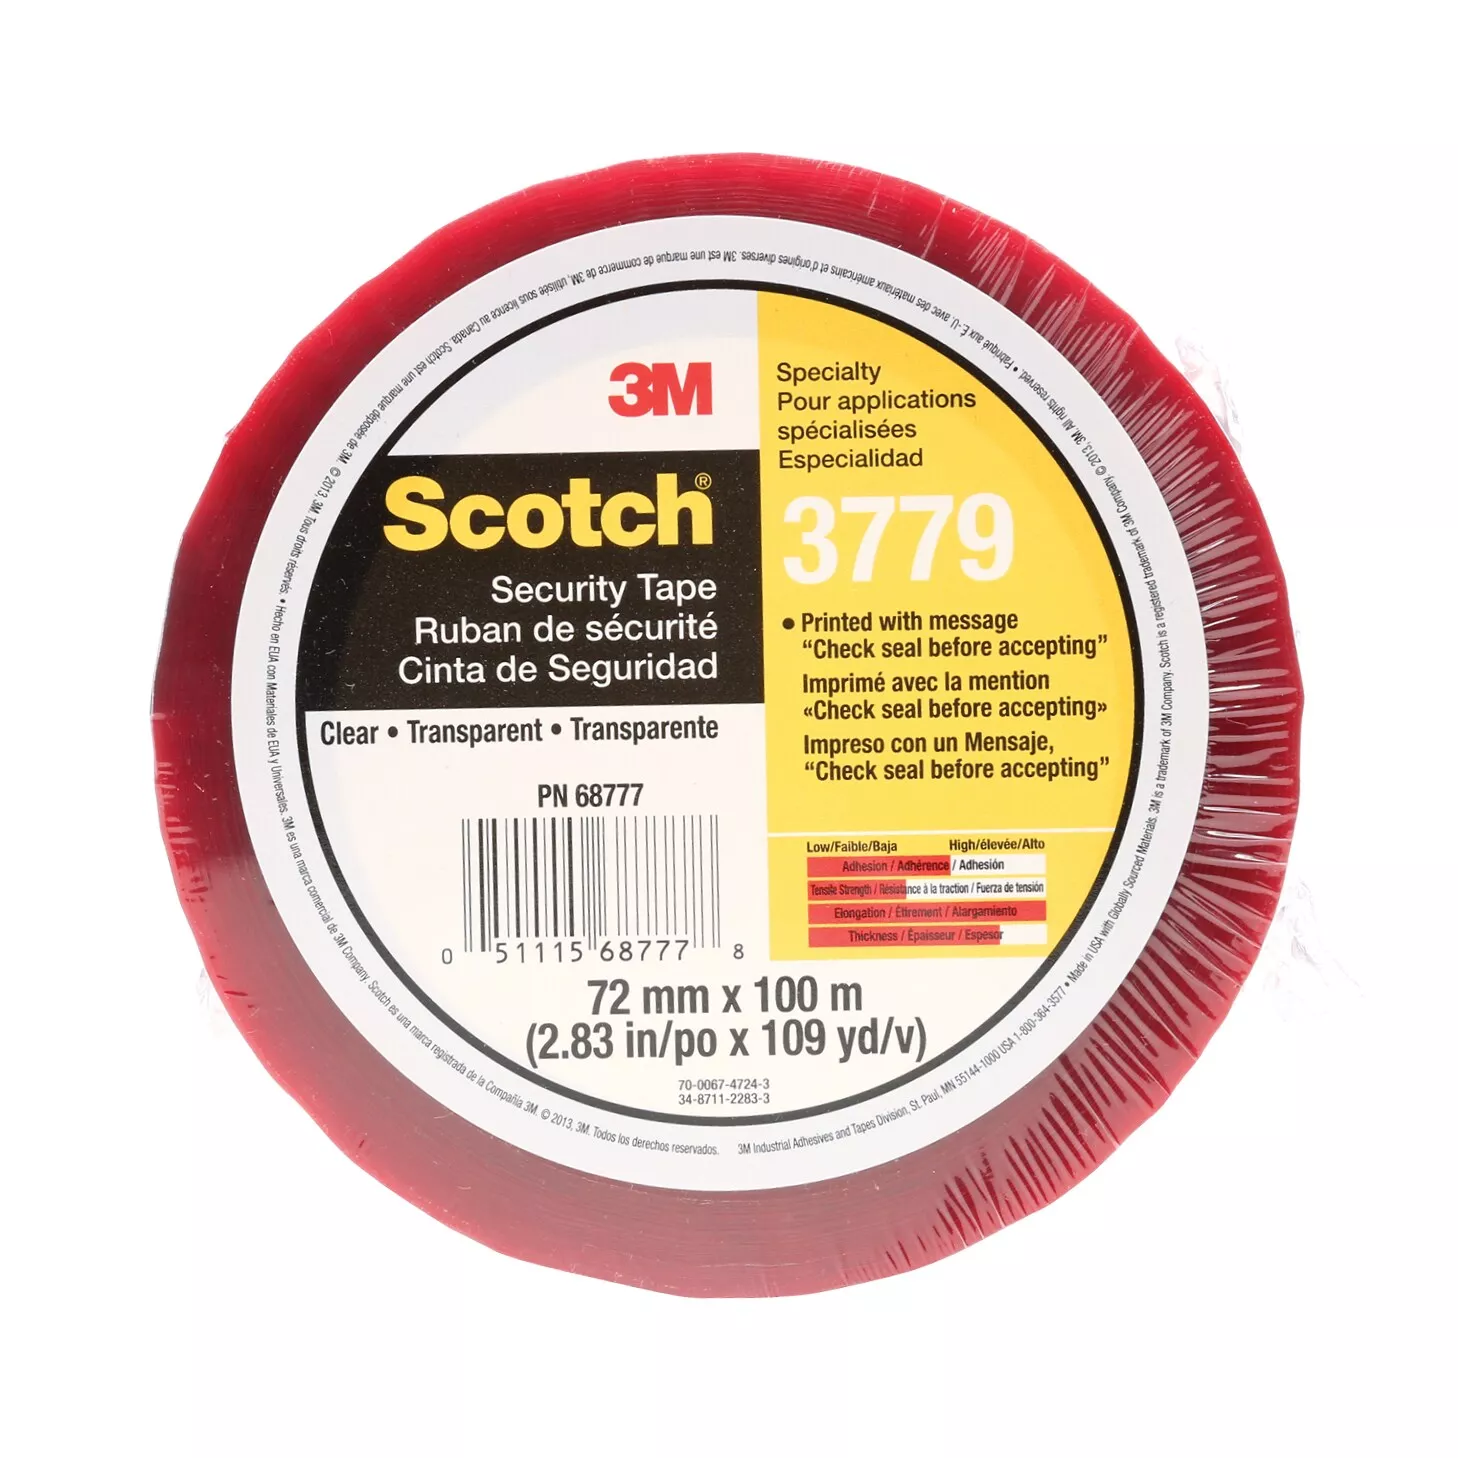 Scotch® Security Message Box Sealing Tape 3779, Clear, 72 mm x 100 m,
24/Case, Individually Wrapped Conveniently Packaged